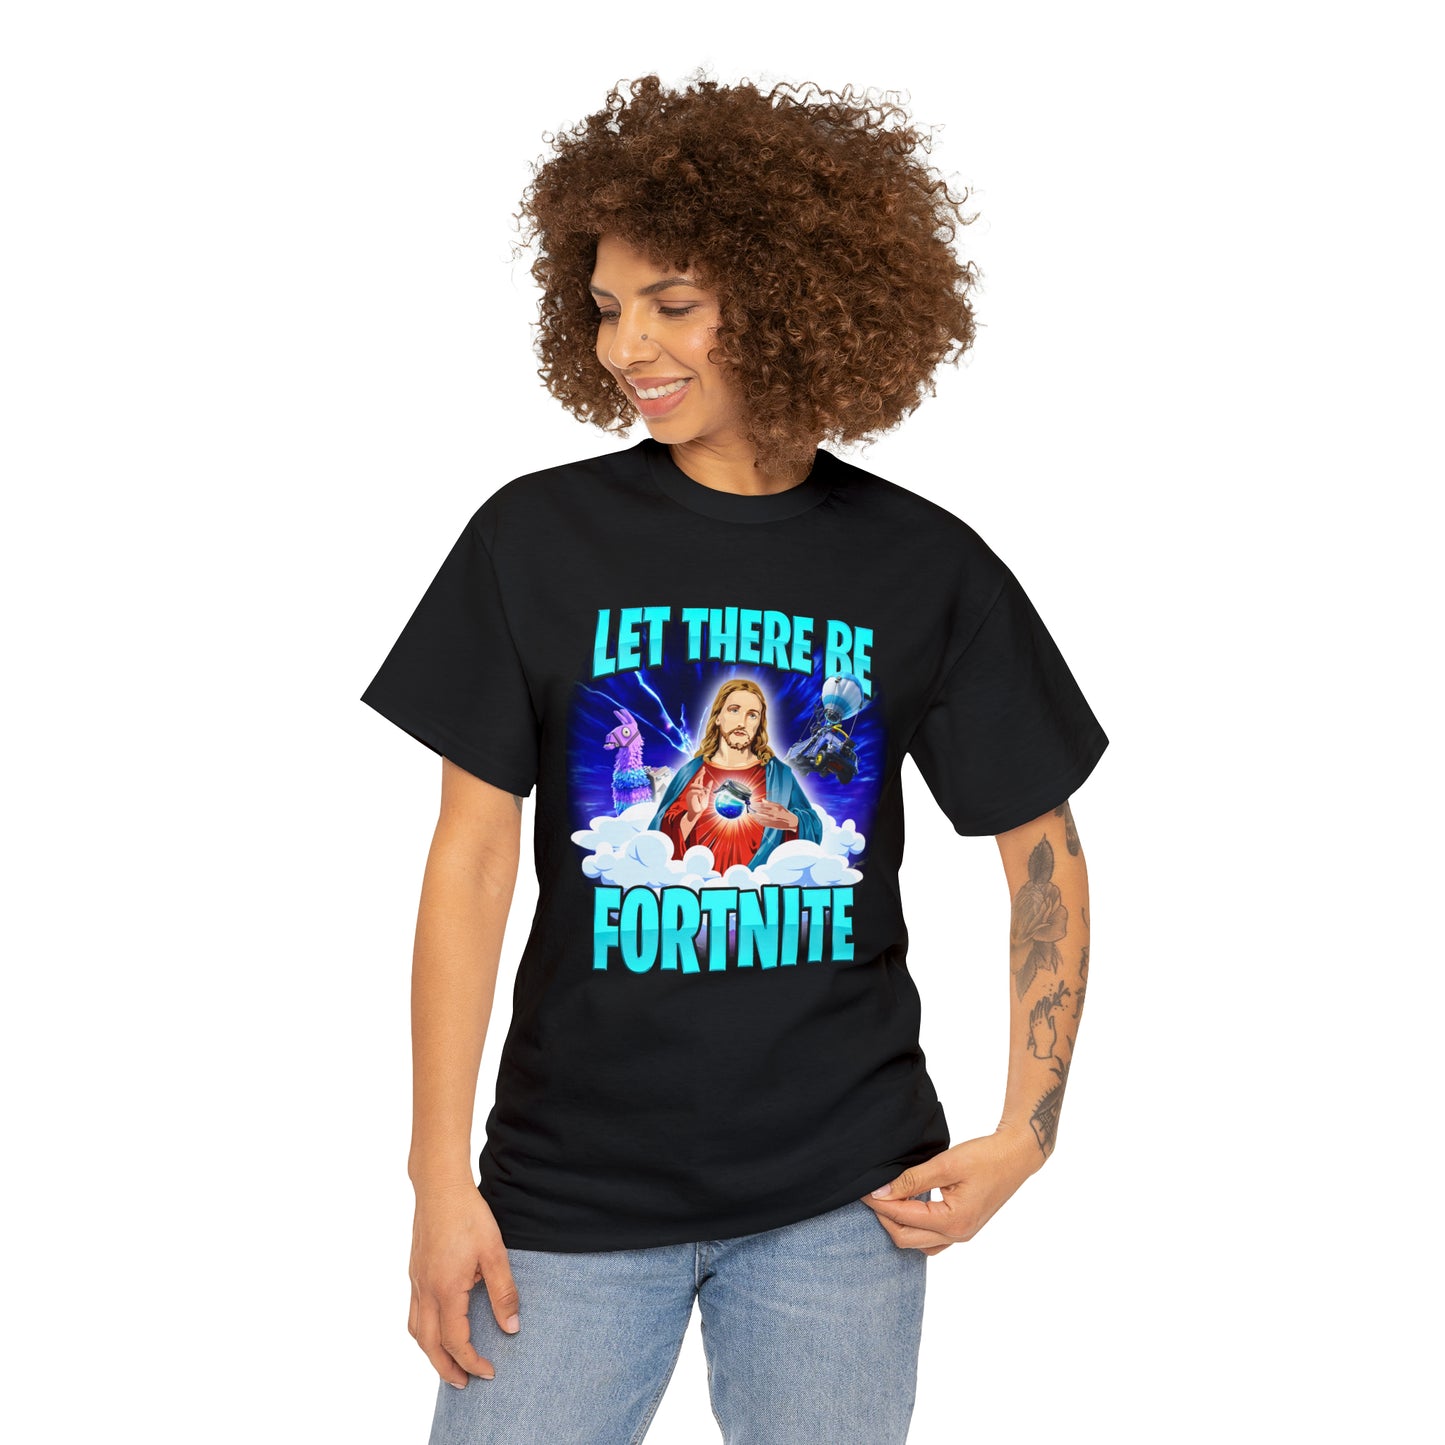 Let There Be Fortnite T-Shirt!